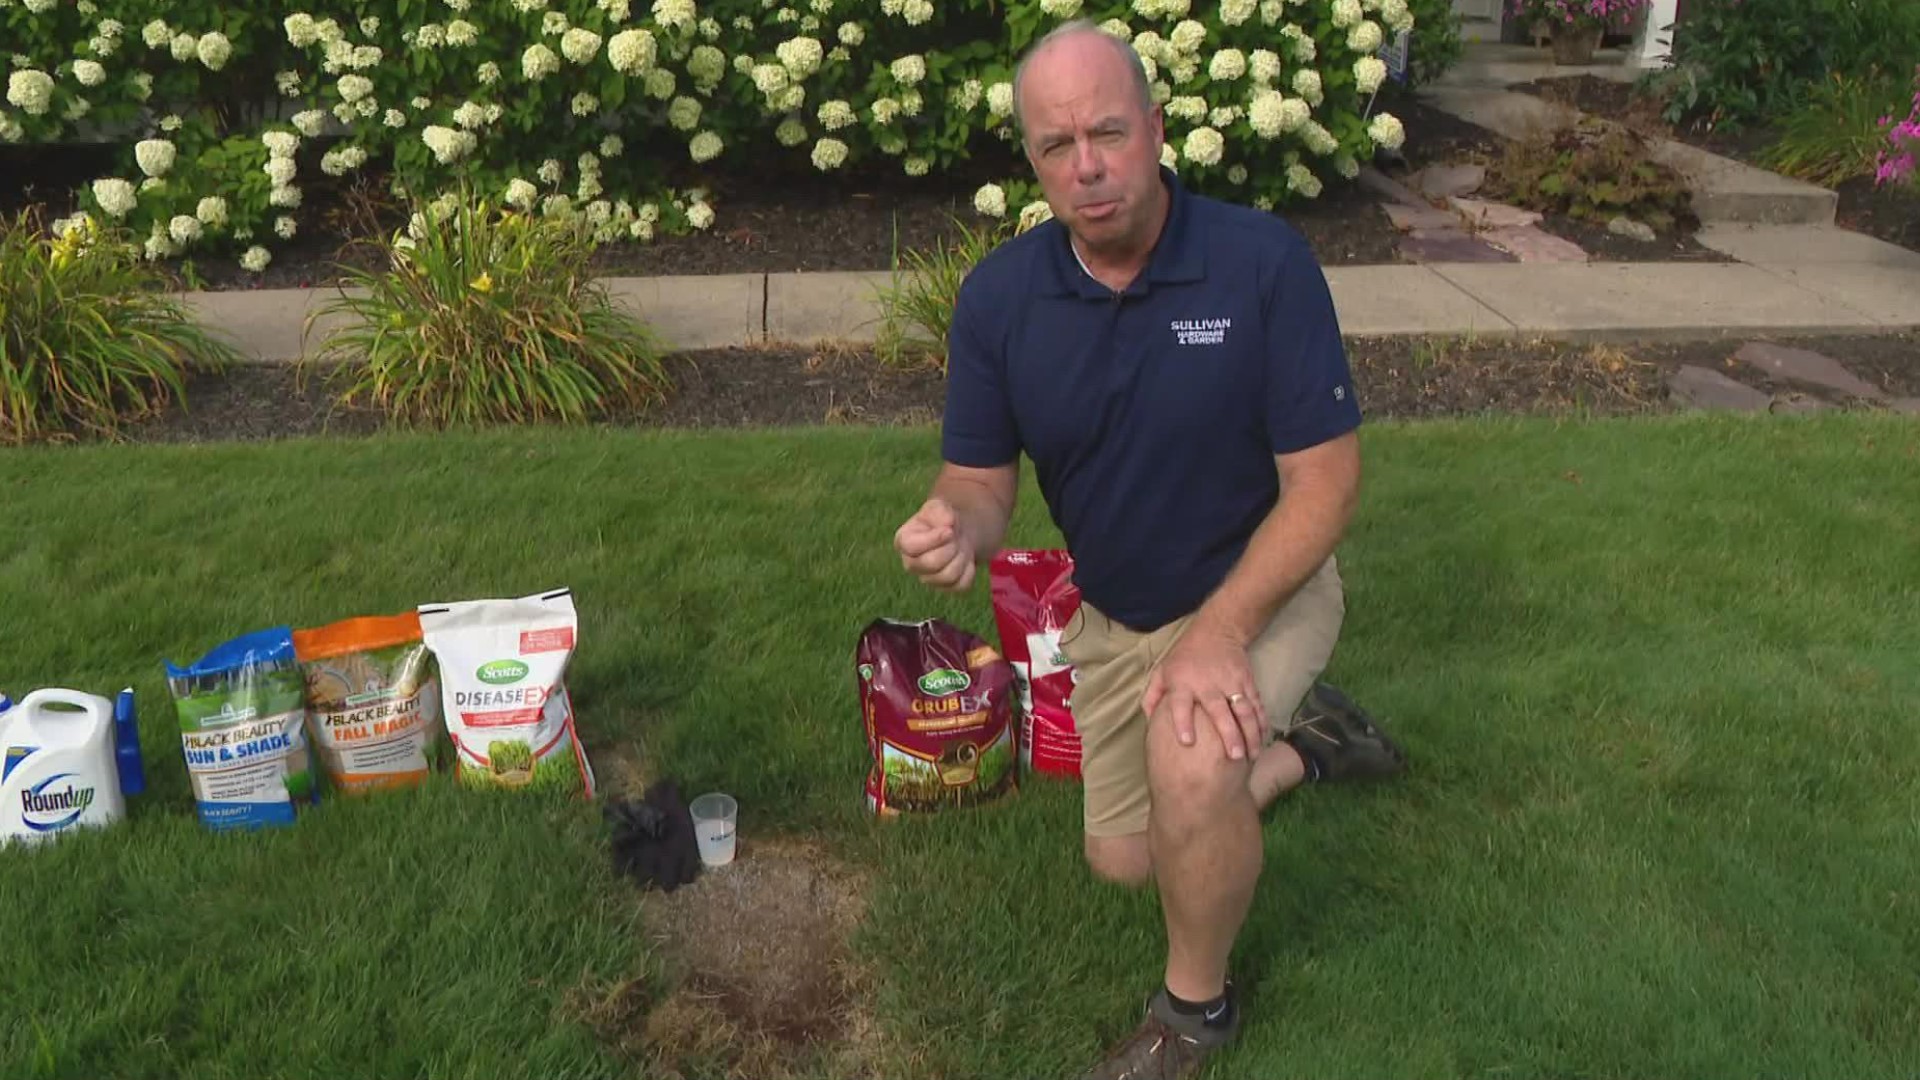 Pat says prep work for fall lawn care and putting down new grass seed begins now.